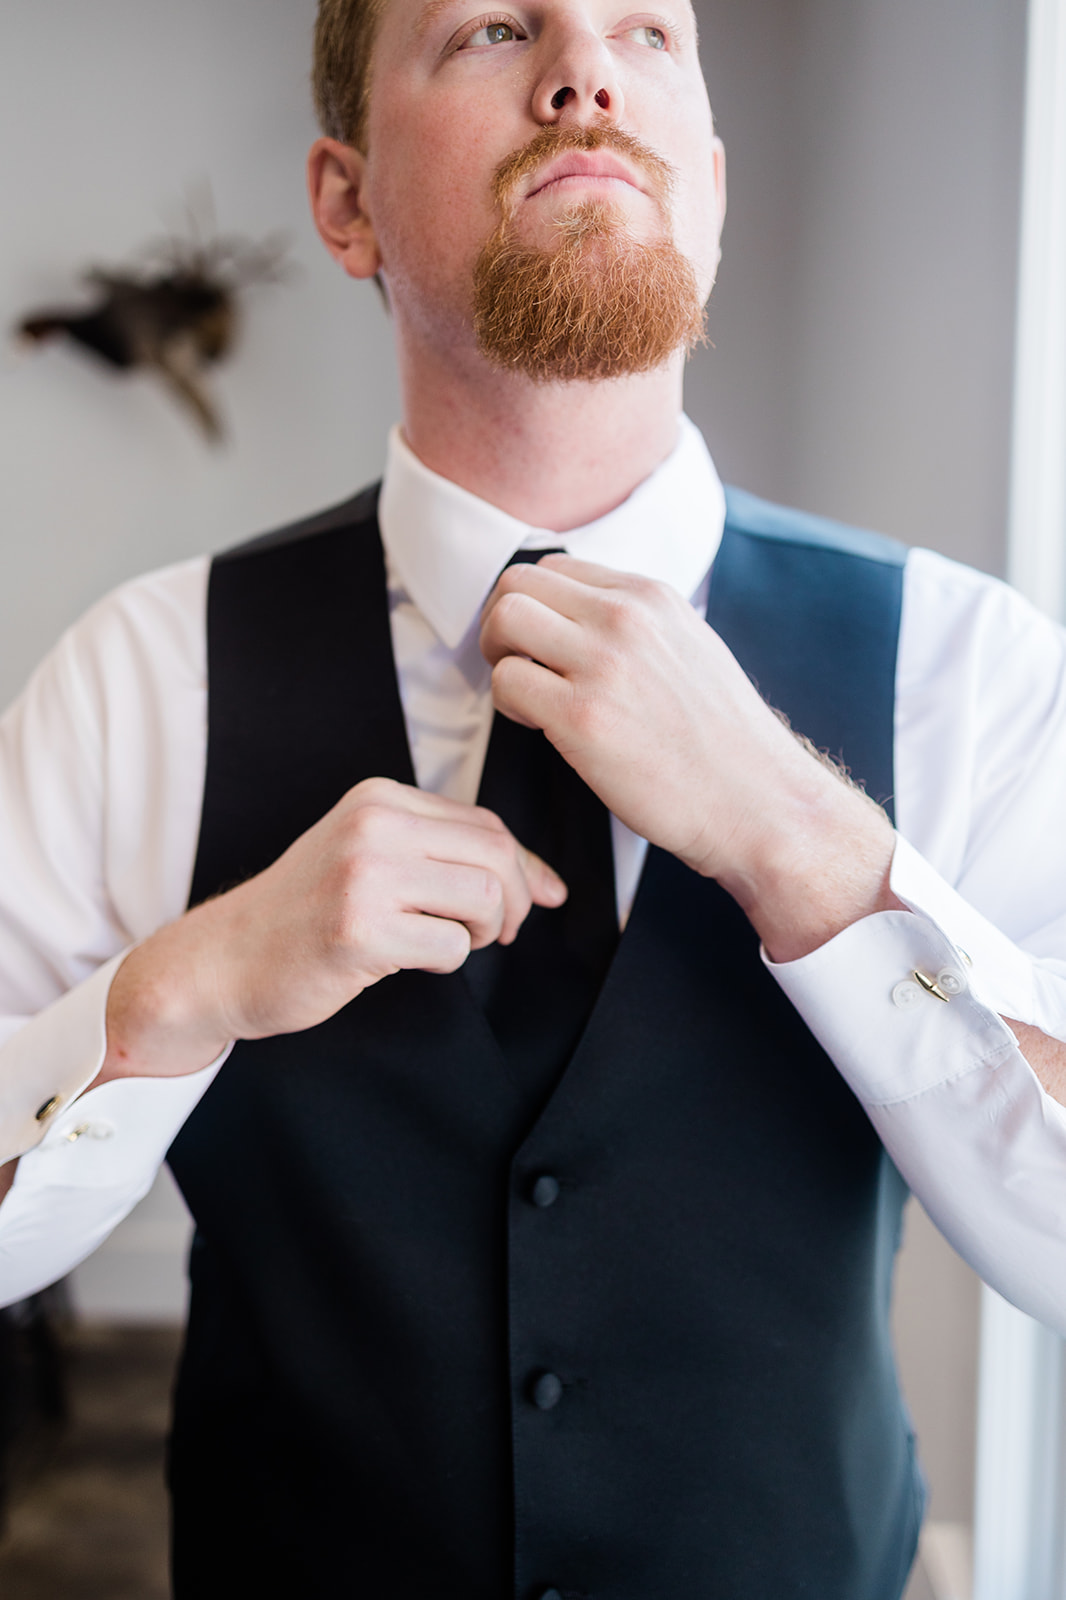 A groom is preparing for his big day. He is getting dressed into his groom attire specifically adjusting his tie in this